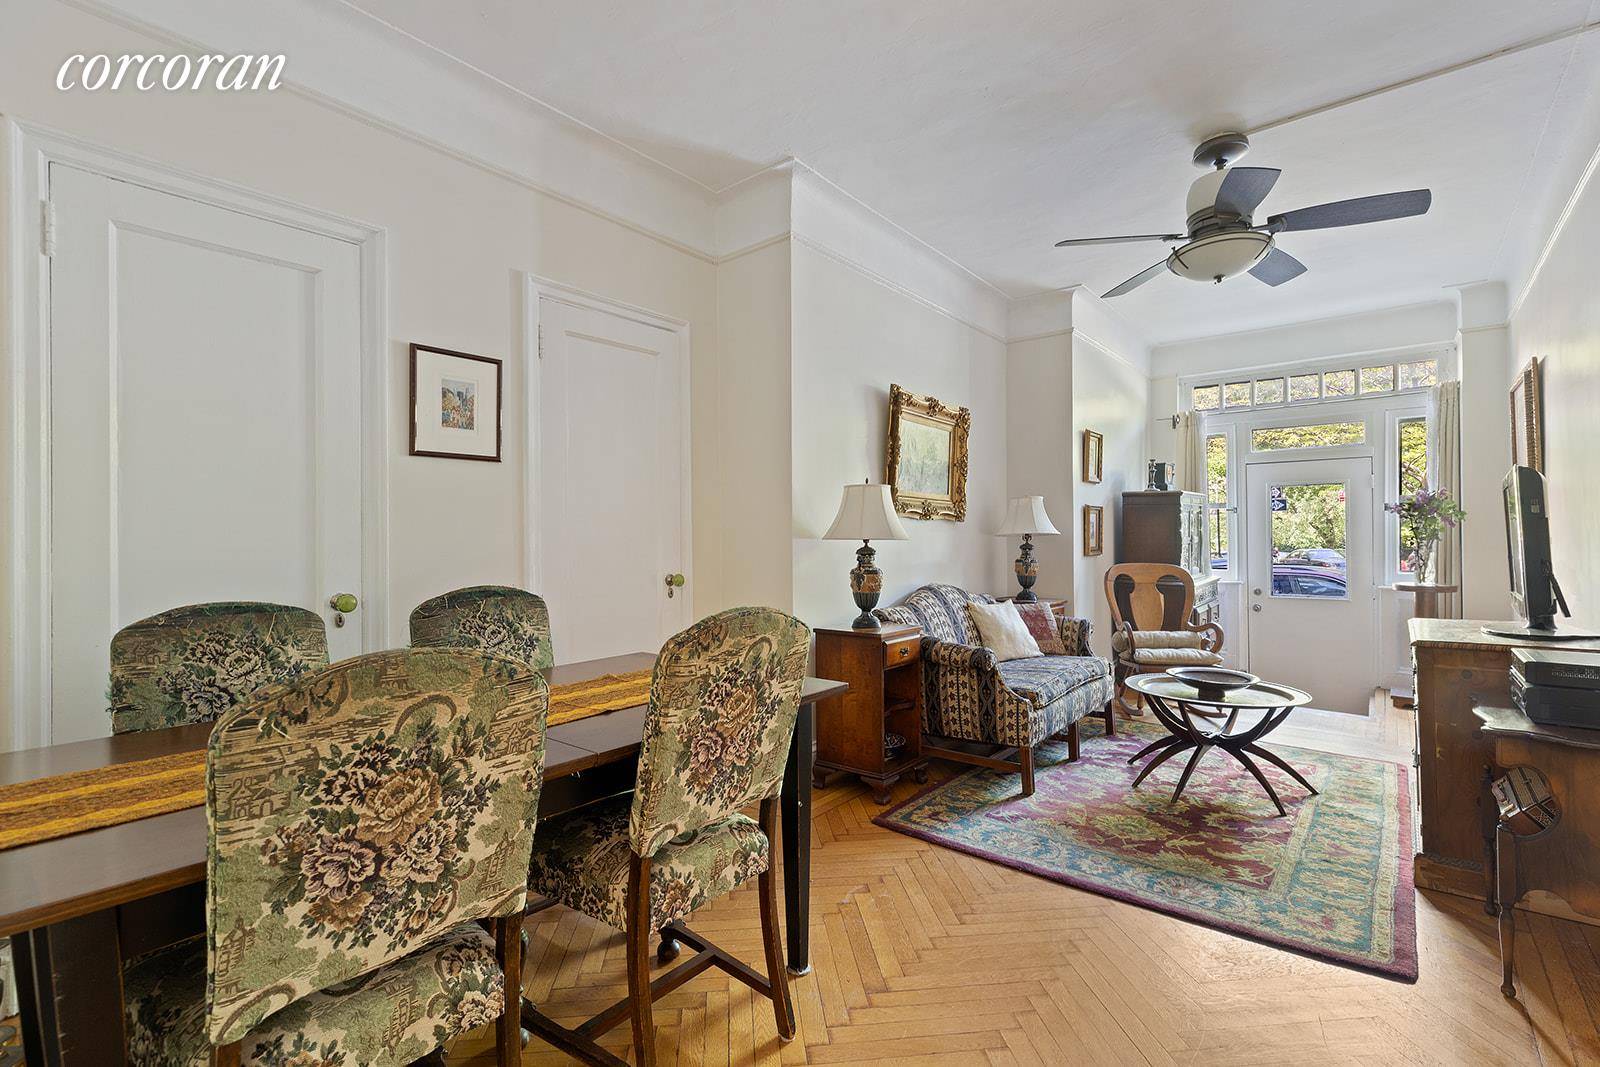 Welcome home to 39 Plaza Street West, apartment MA, an elegant one bedroom apartment located on one of the most highly coveted blocks in North Park Slope.